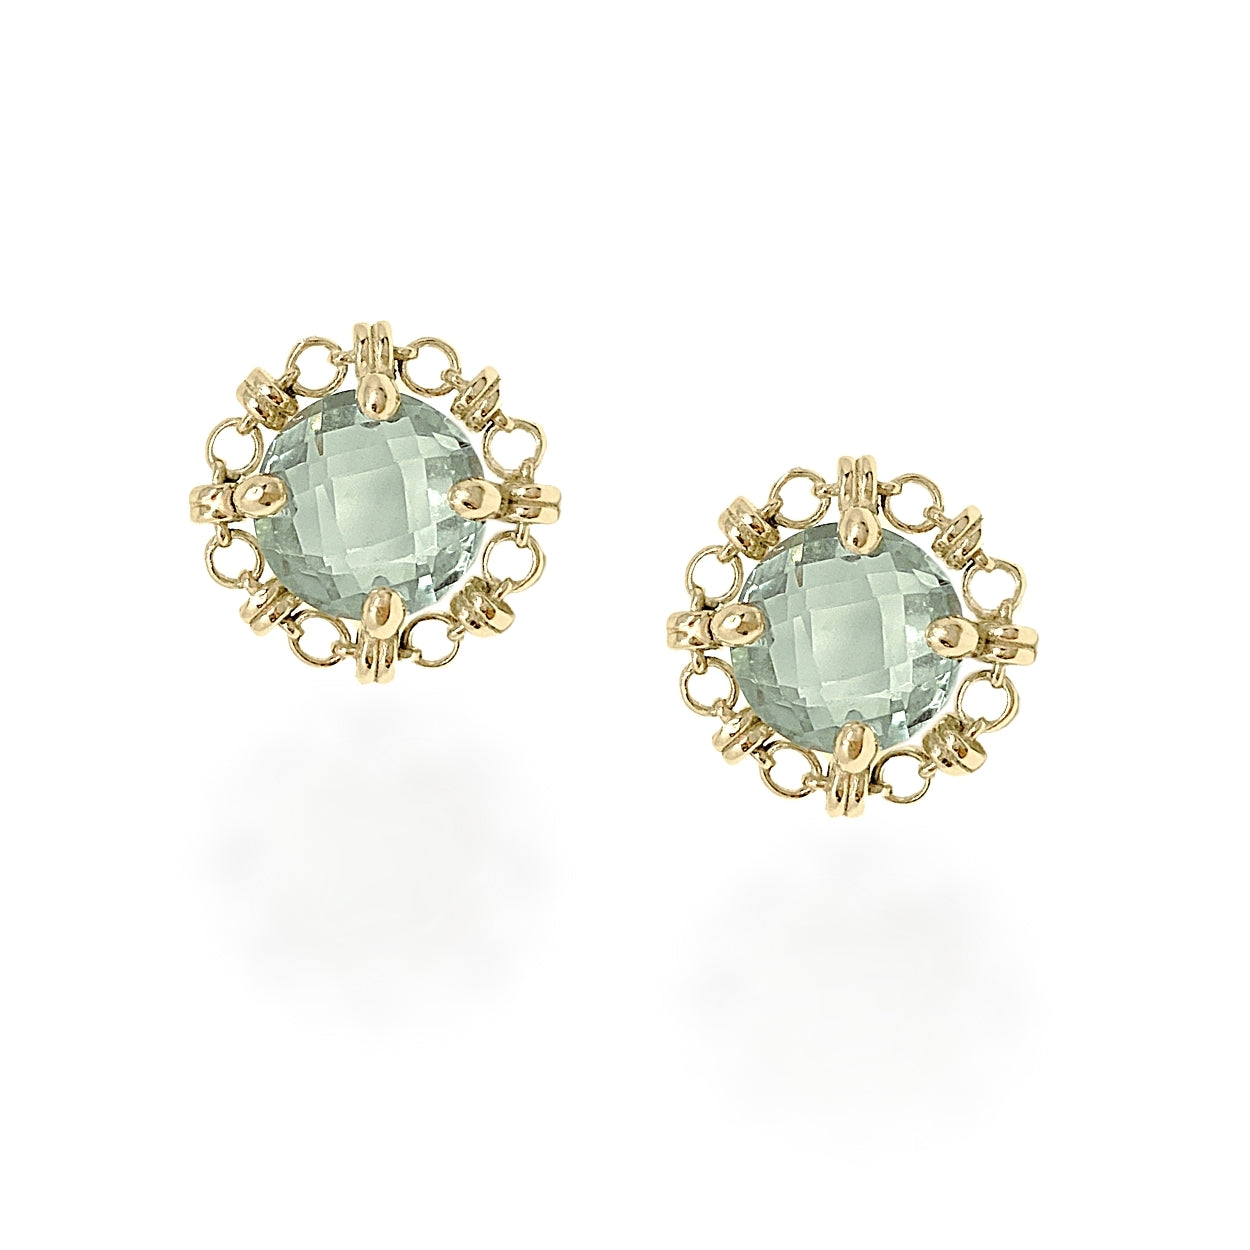 Mini Filary Stud Earrings in Gold with Prasiolite